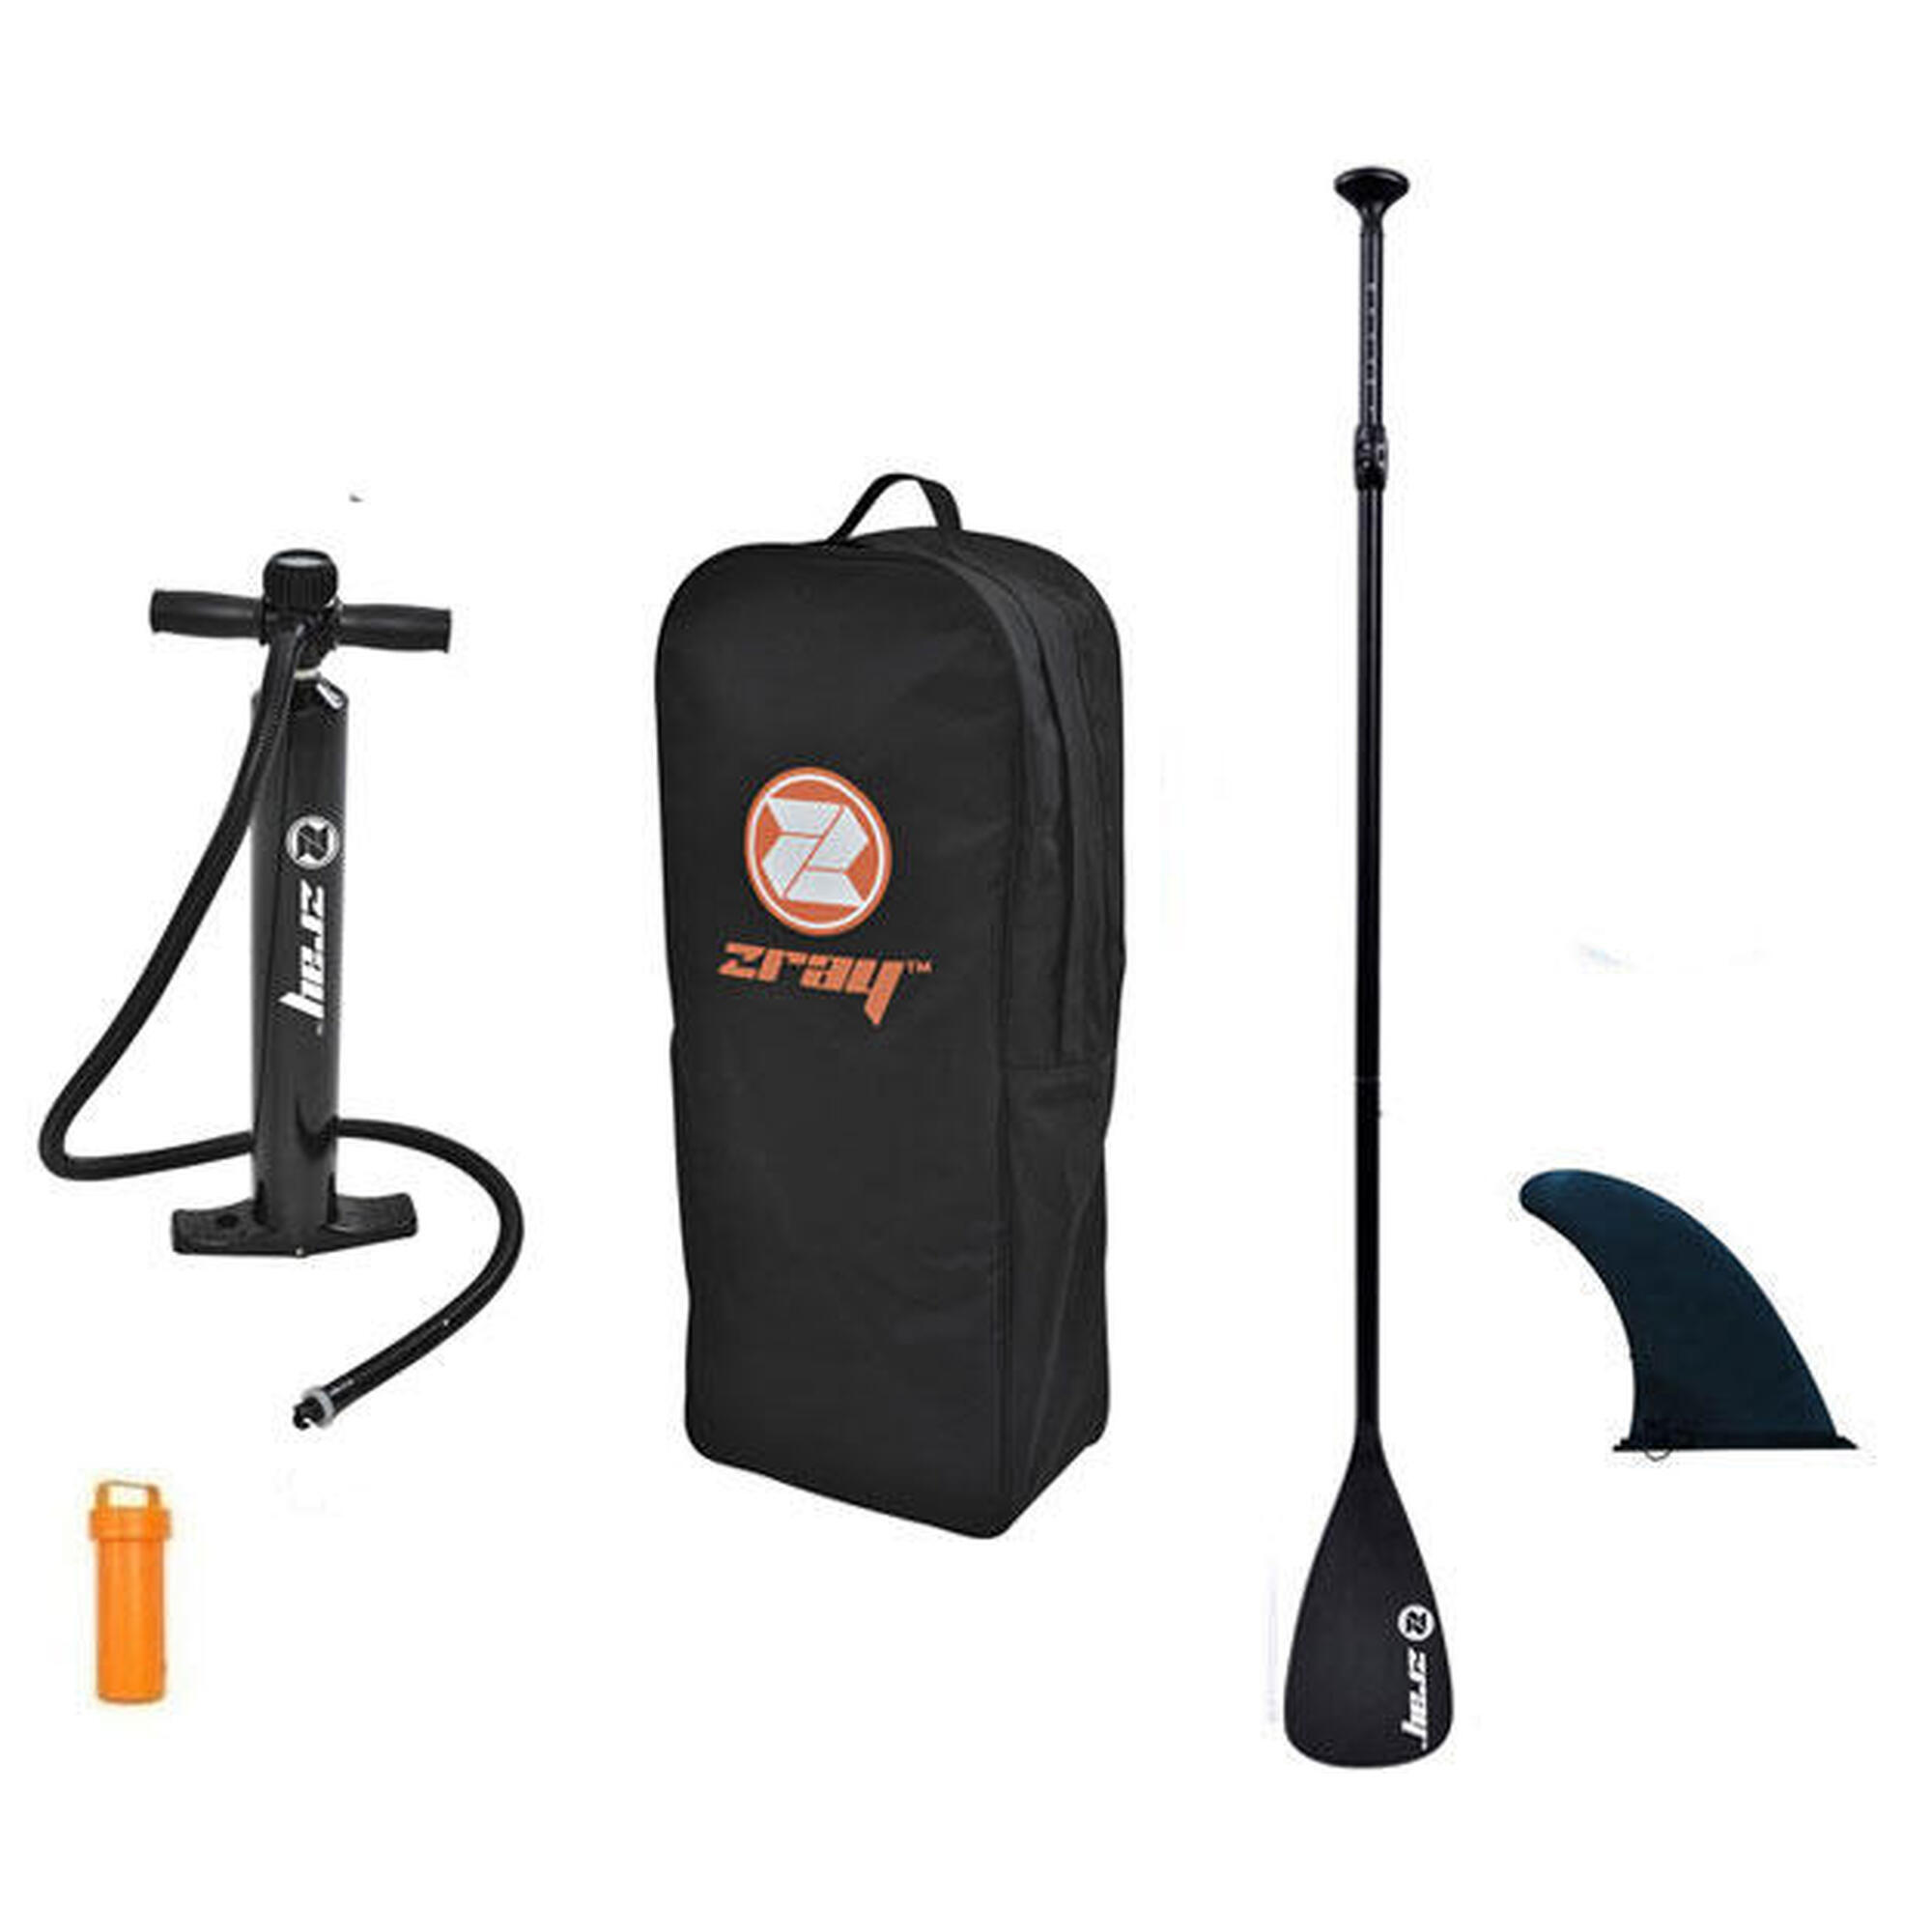 Pack paddle gonflable E11 11' ZRAY (sup.pompe.pagaie.siège)